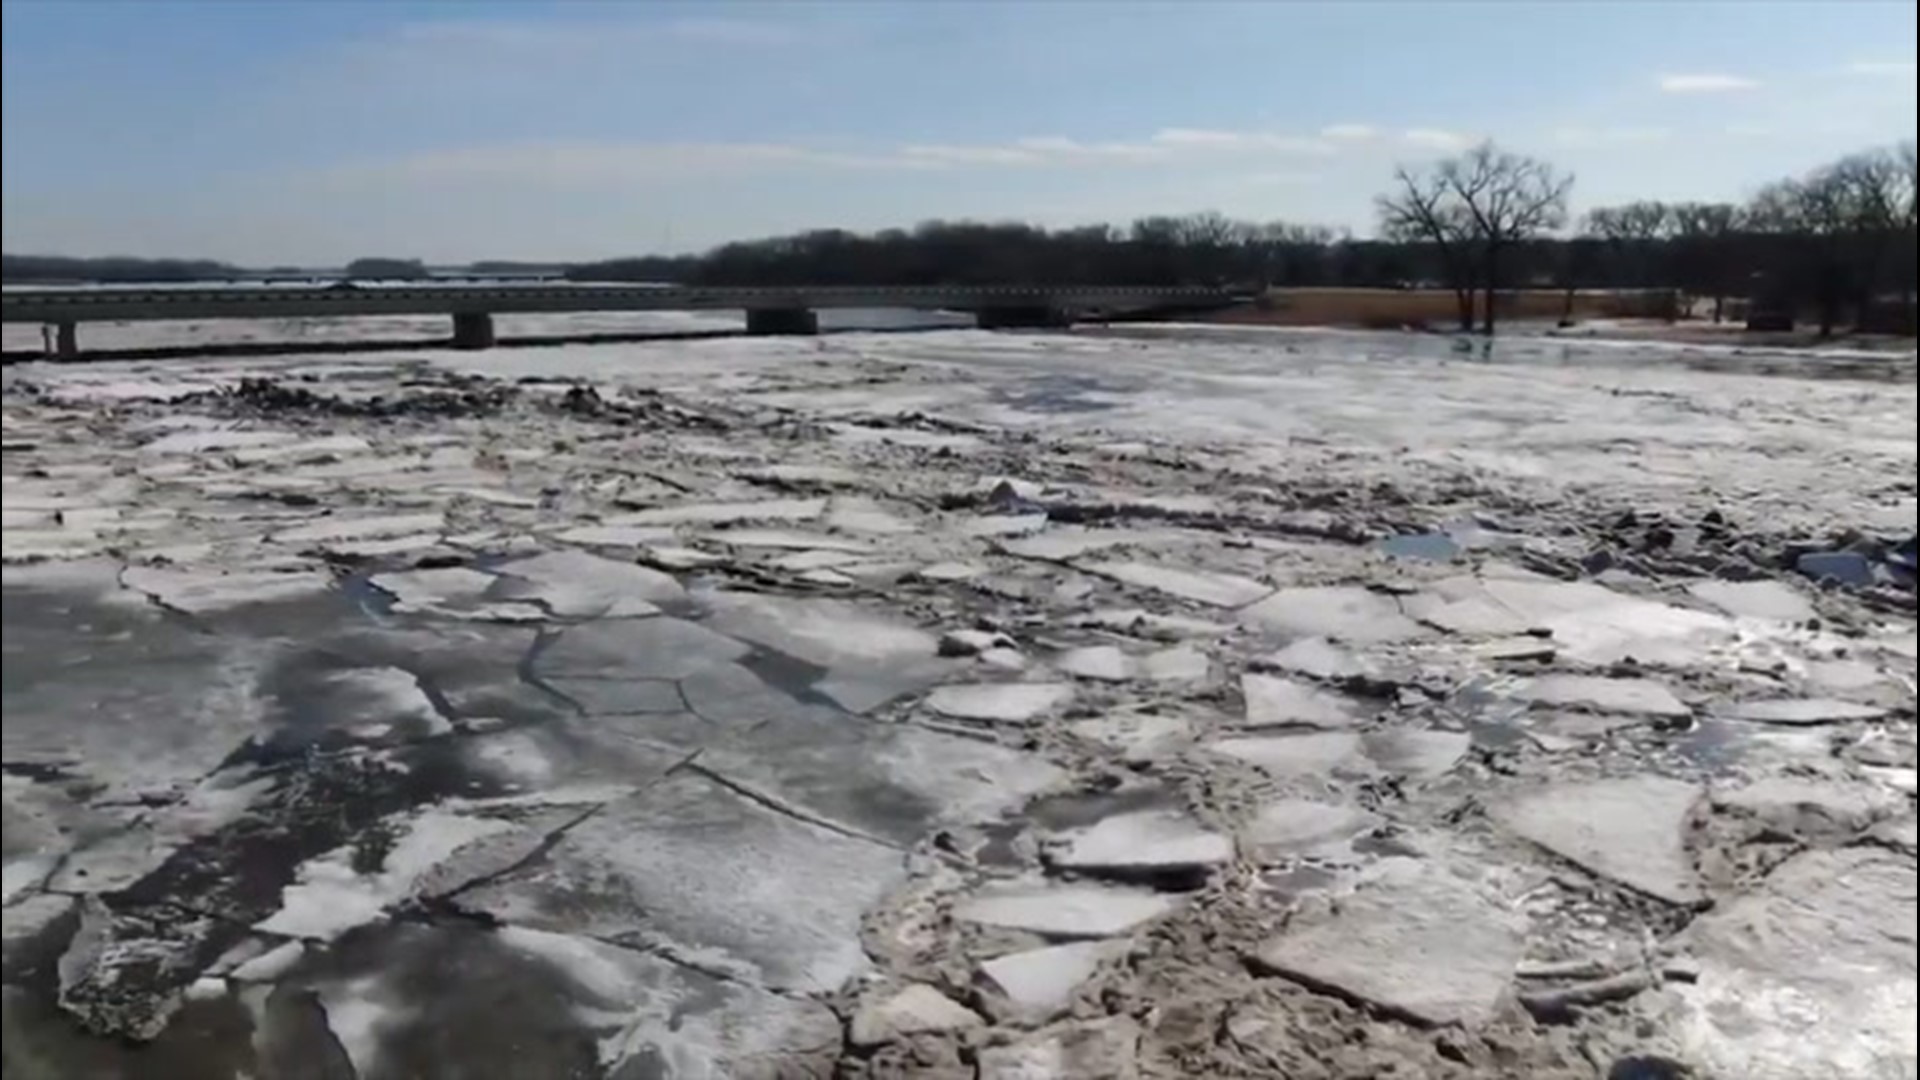 On Feb. 18, an ice jam formed in the Platte River south of Fremont, Nebraska, and could cause upstream flooding.